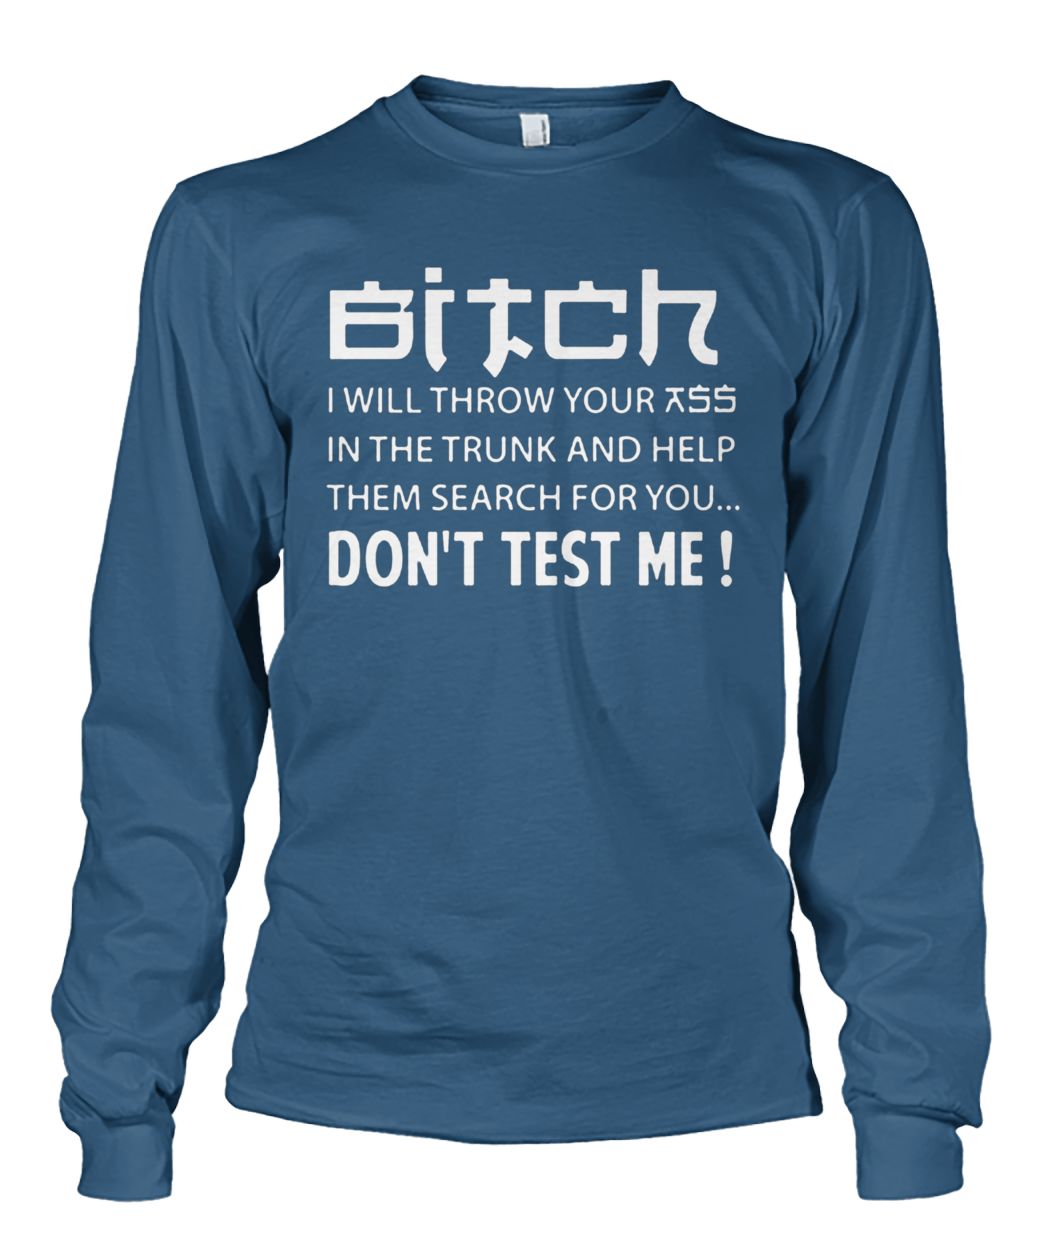 Bitch I will throw your ass in the trunk and help them search for you don't test me unisex long sleeve